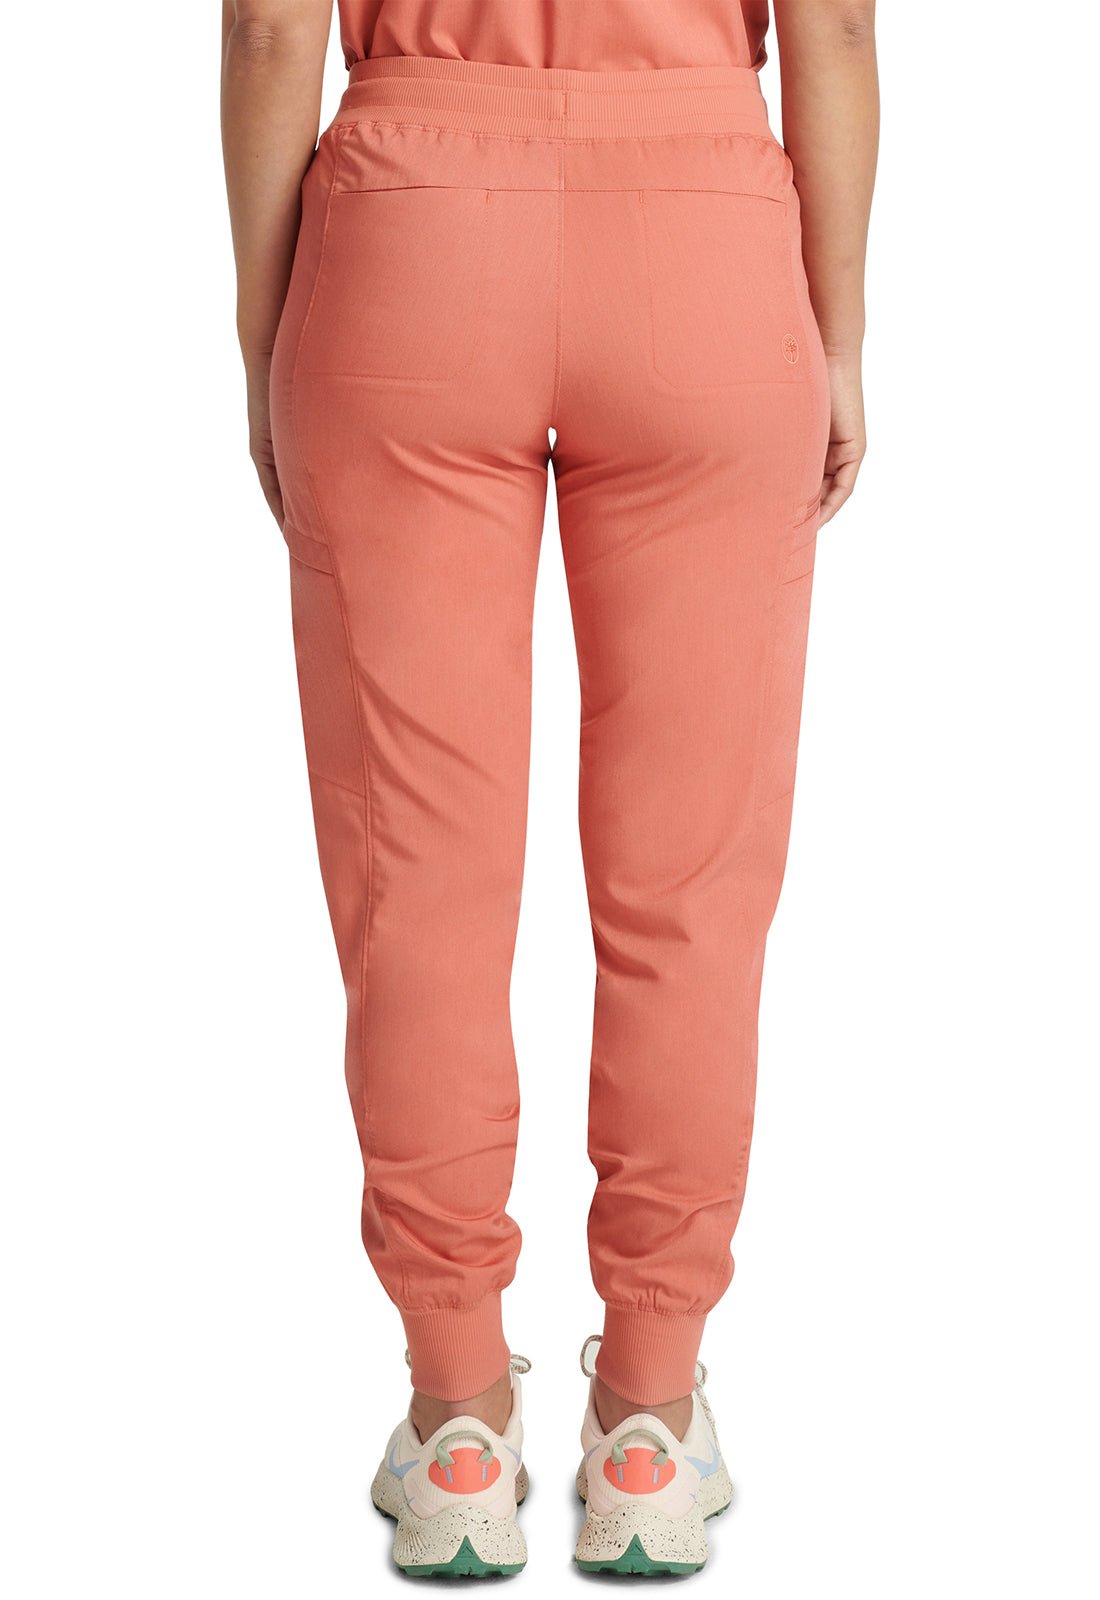 Healing Hands Toby Jogger Pant 9244 in Dried Rose, Pink Popsicle, Soft Clay - Scrubs Select